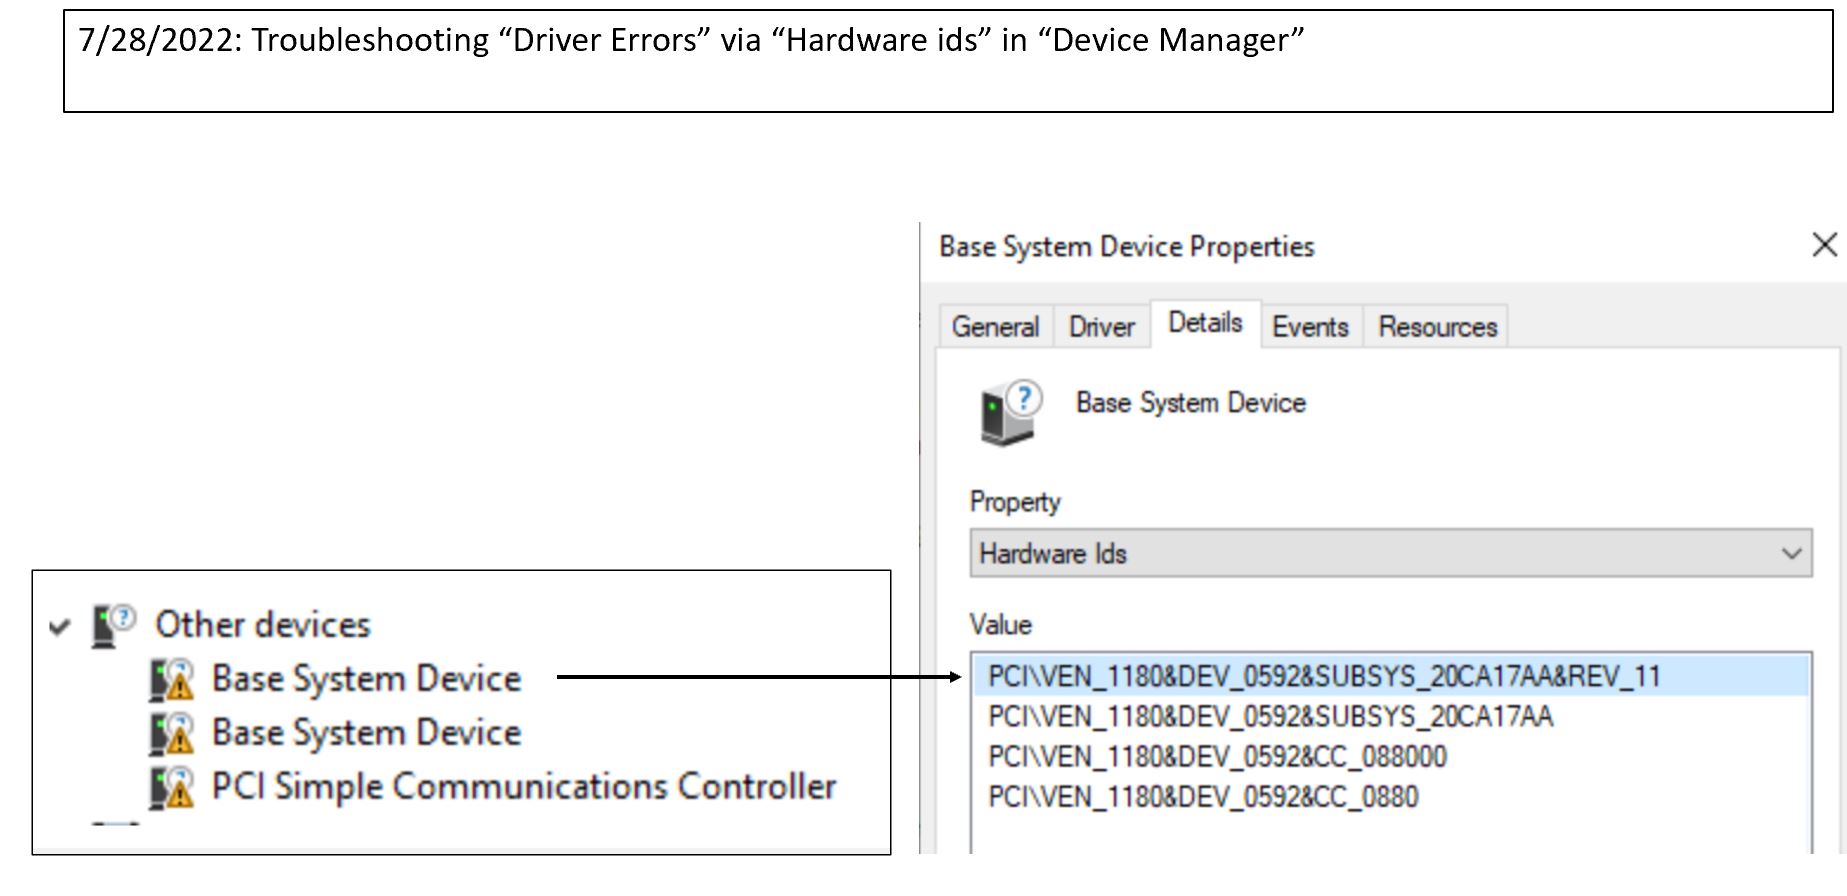 Driver_Issues_per_Device_Manager_R1_07282022.JPG